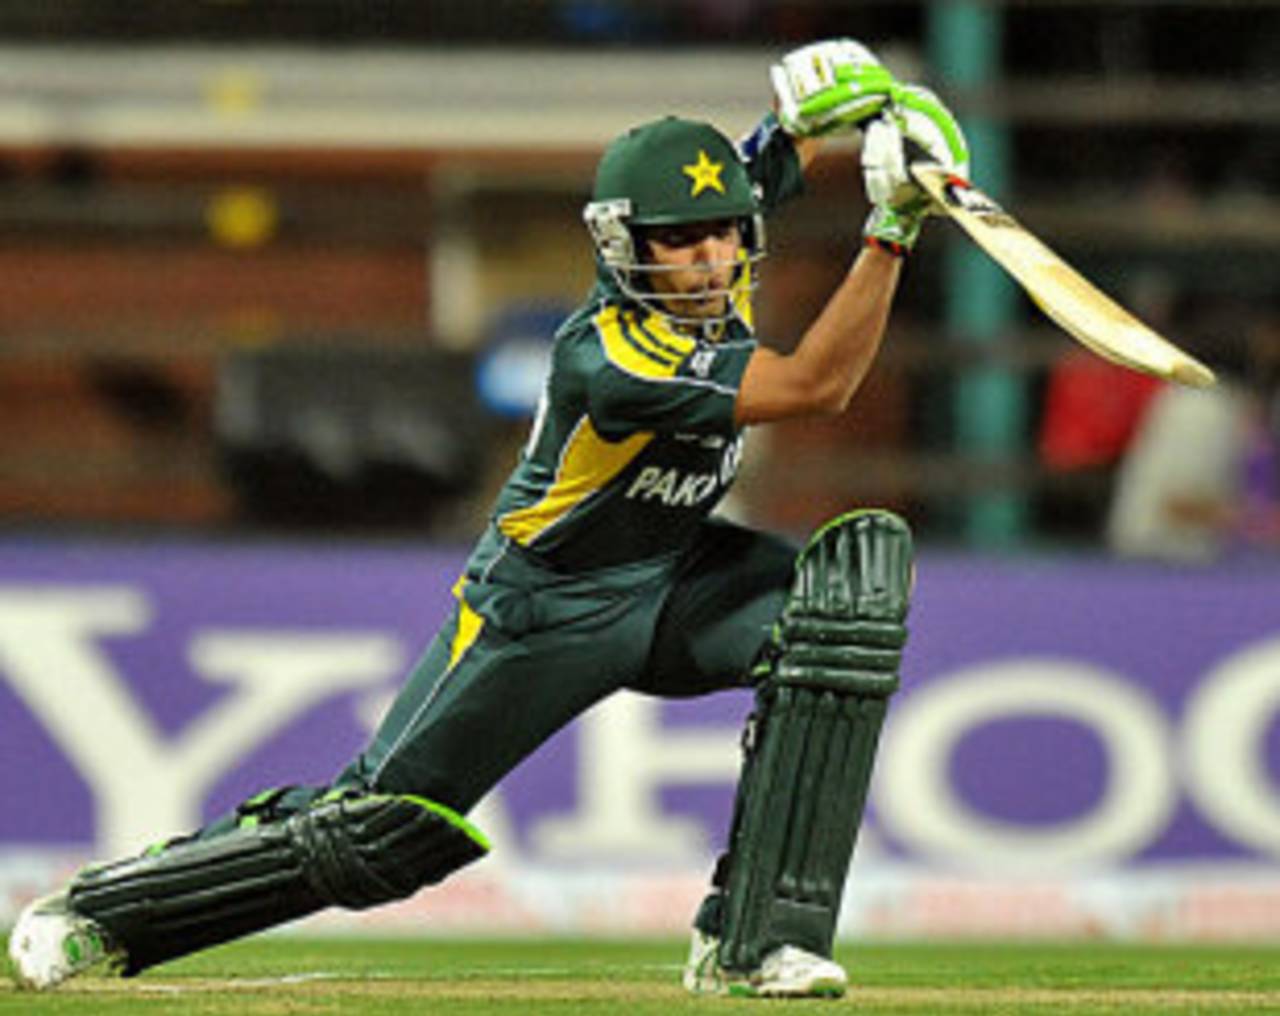 Umar Akmal averages 49.83 but was not part of the side for the second game against New Zealand&nbsp;&nbsp;&bull;&nbsp;&nbsp;AFP